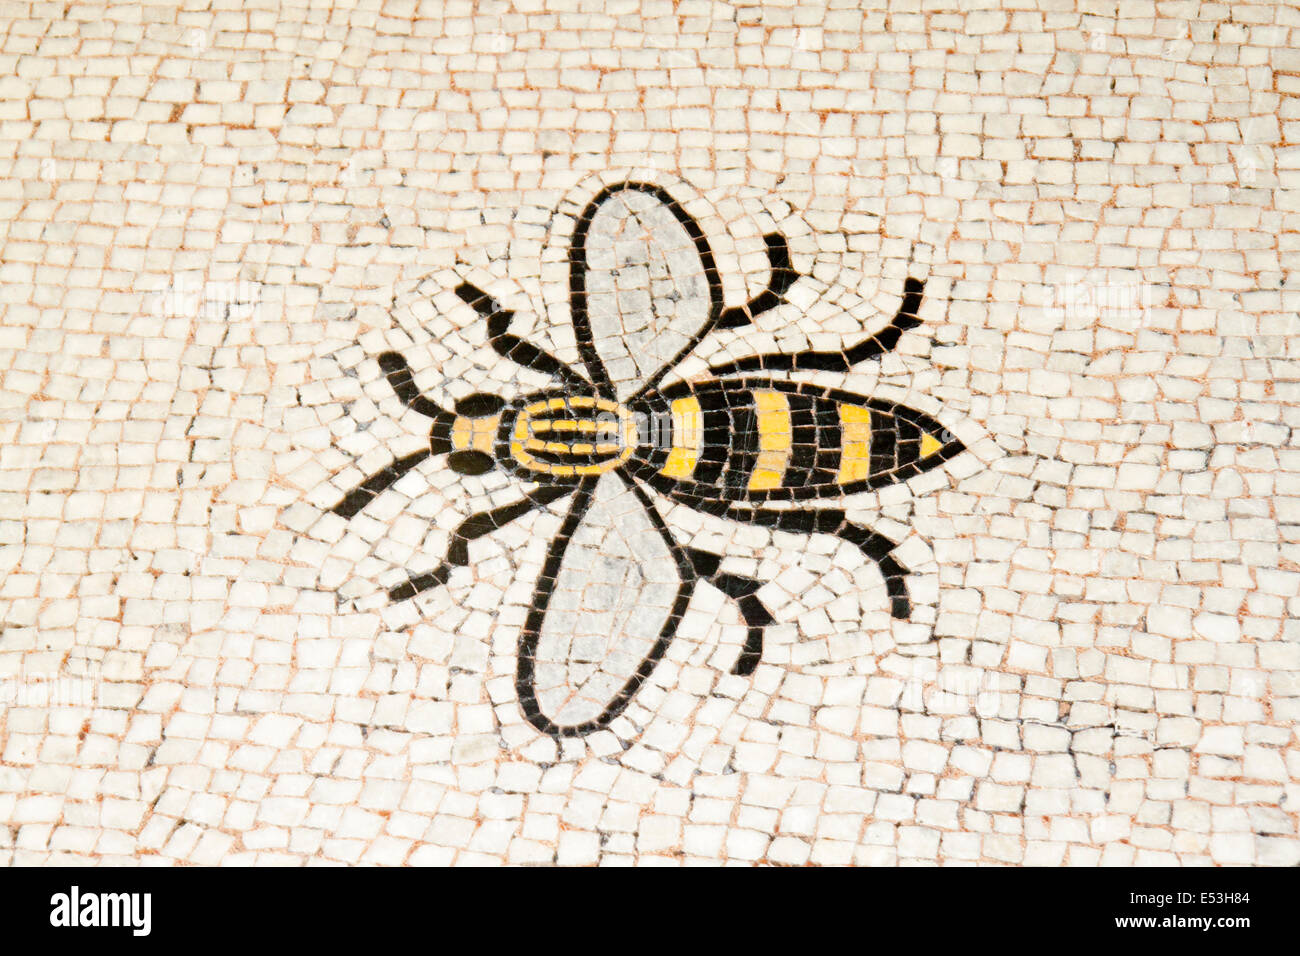 Manchester Town Hall Interior, showing the mosaic floor outside the Great Hall, inlaid with bees. Stock Photo